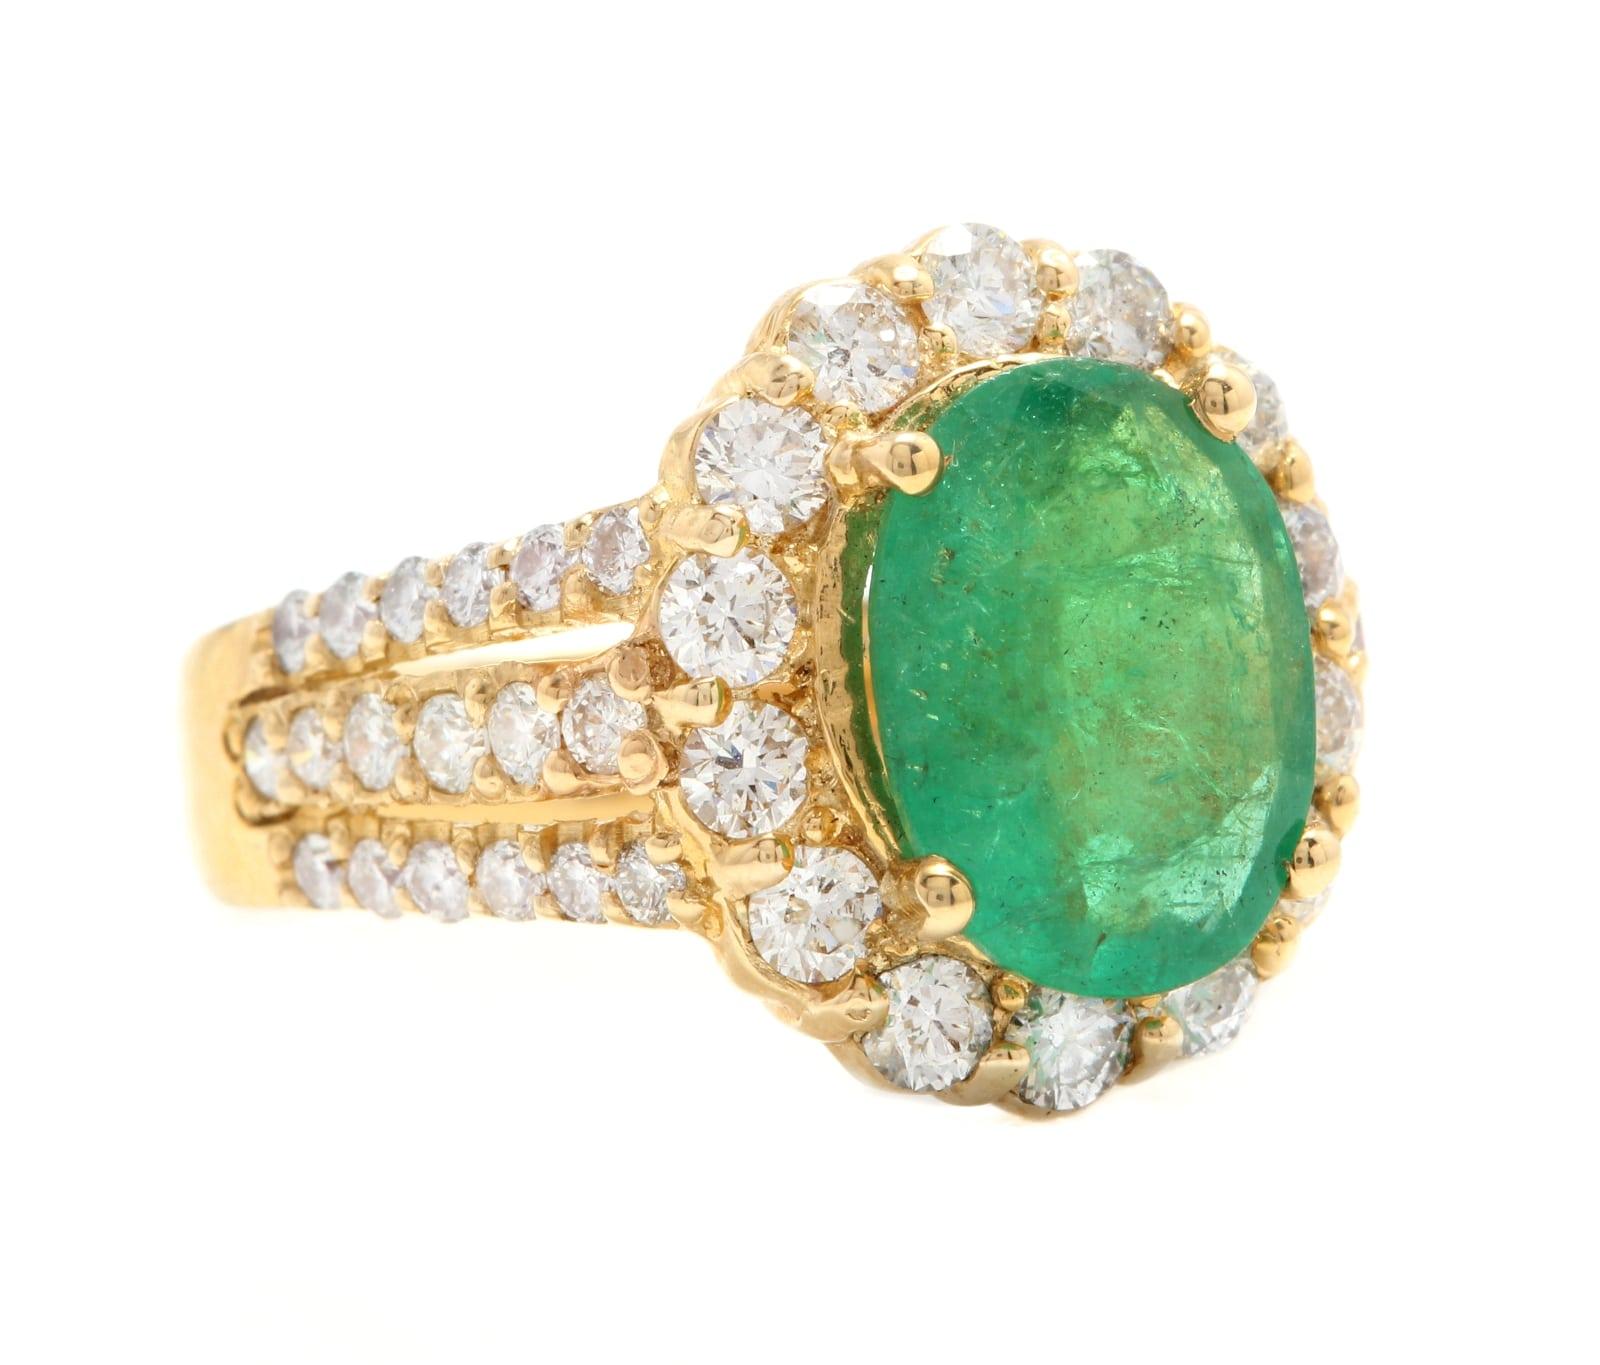 4.80 Carats Natural Emerald and Diamond 18K Solid Yellow Gold Ring

Total Natural Oval Cut Emerald Weight is: Approx. 3.30 Carats (transparent )

Emerald Measures: Approx. 11.00 x 9.00mm

Natural Round Diamonds Weight: Approx. 1.50 Carats (color G-H